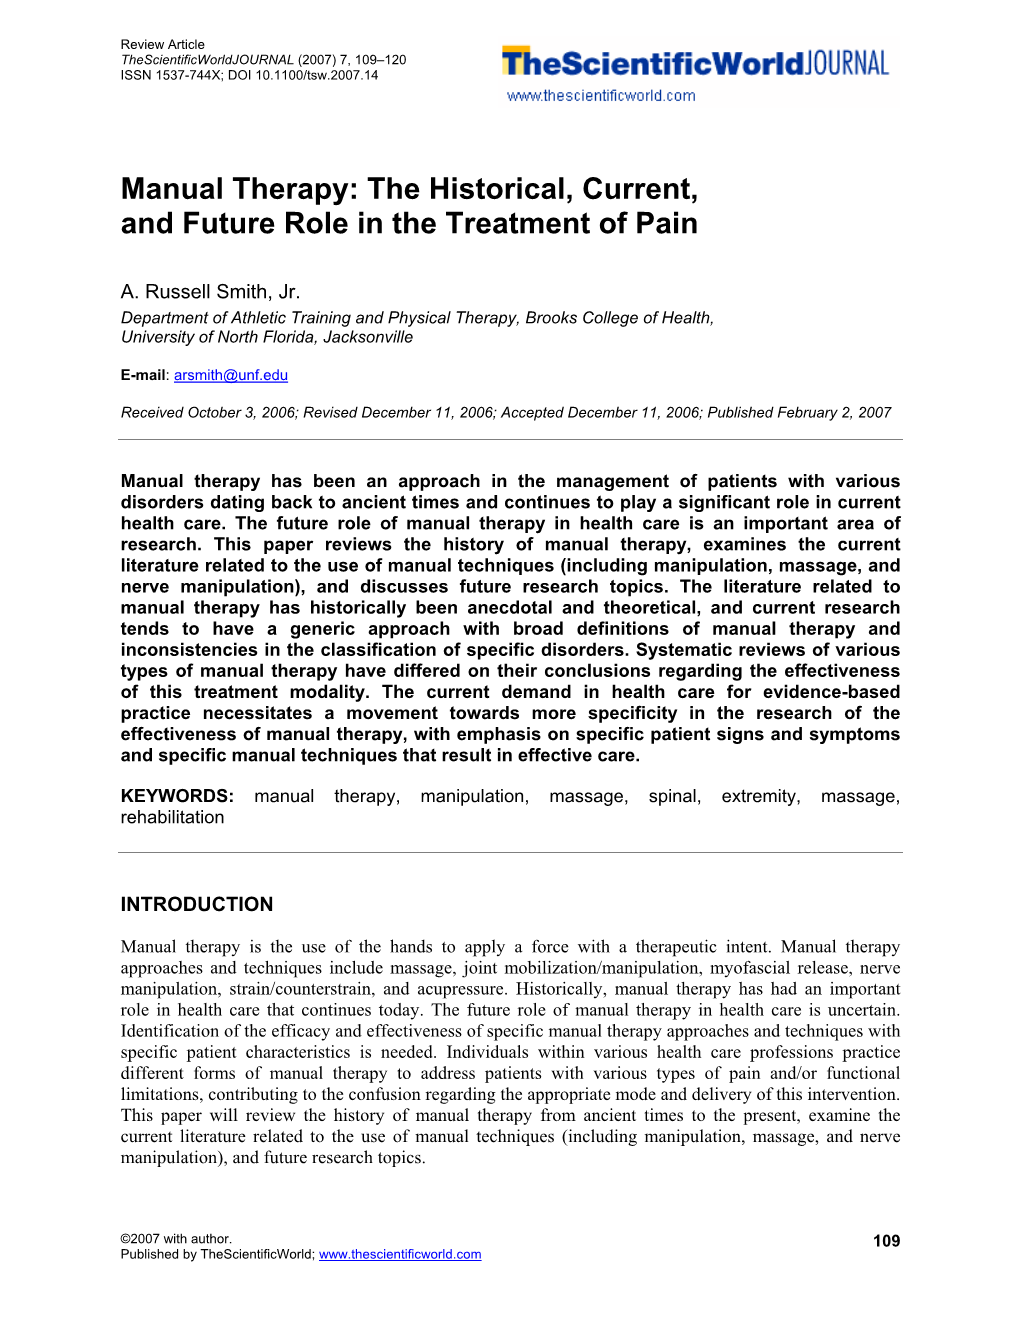 Manual Therapy: the Historical, Current, and Future Role in the Treatment of Pain